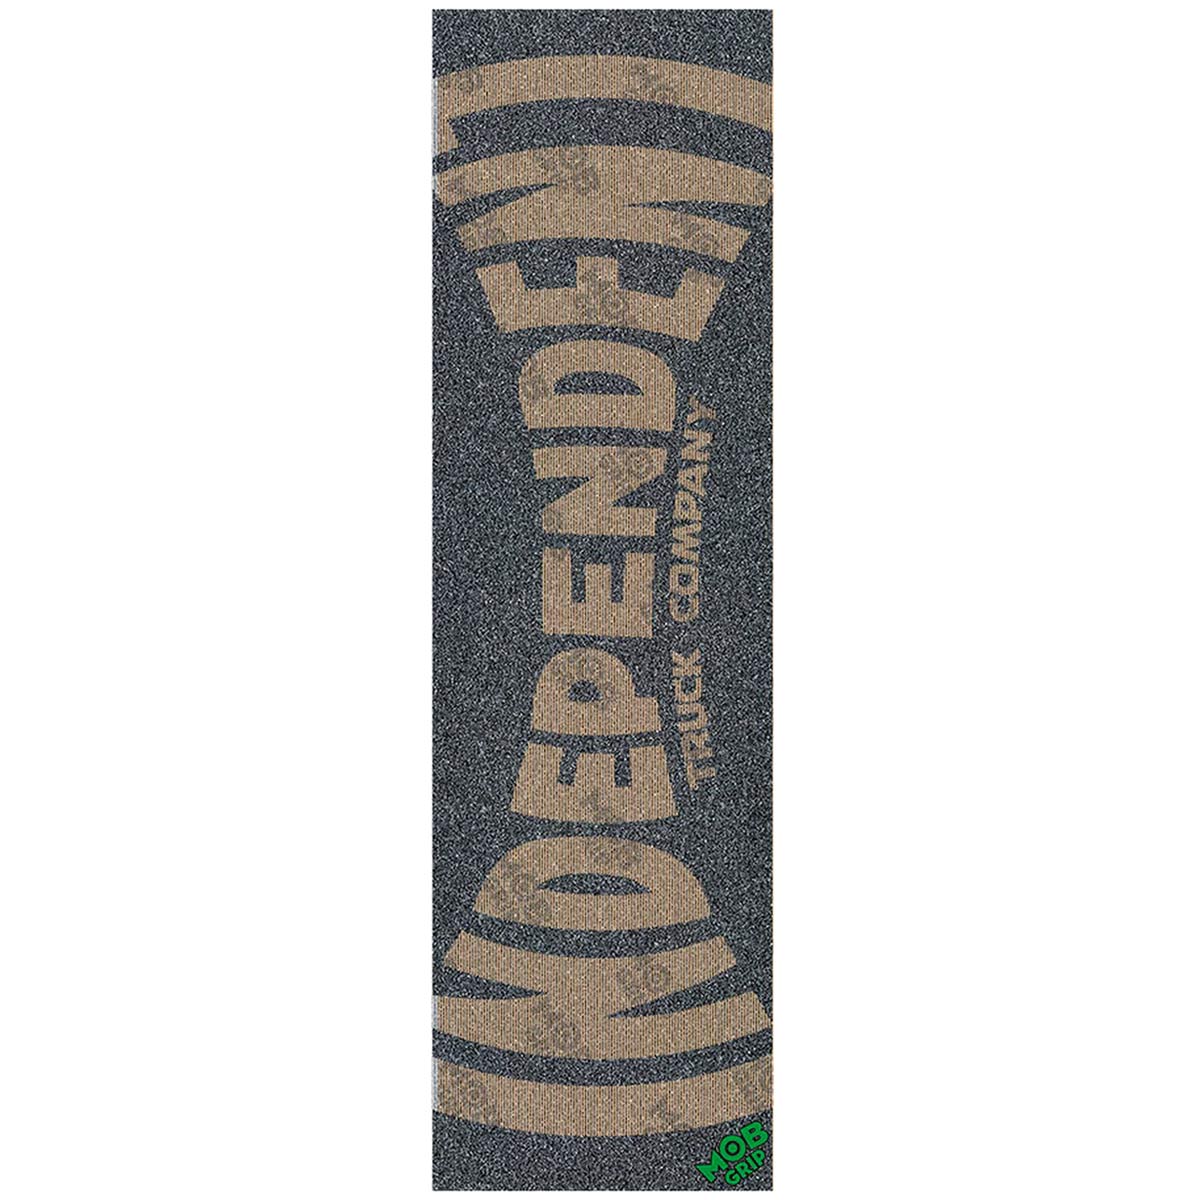 INDENPENDENT GRIPTAPE INDY CLEAR